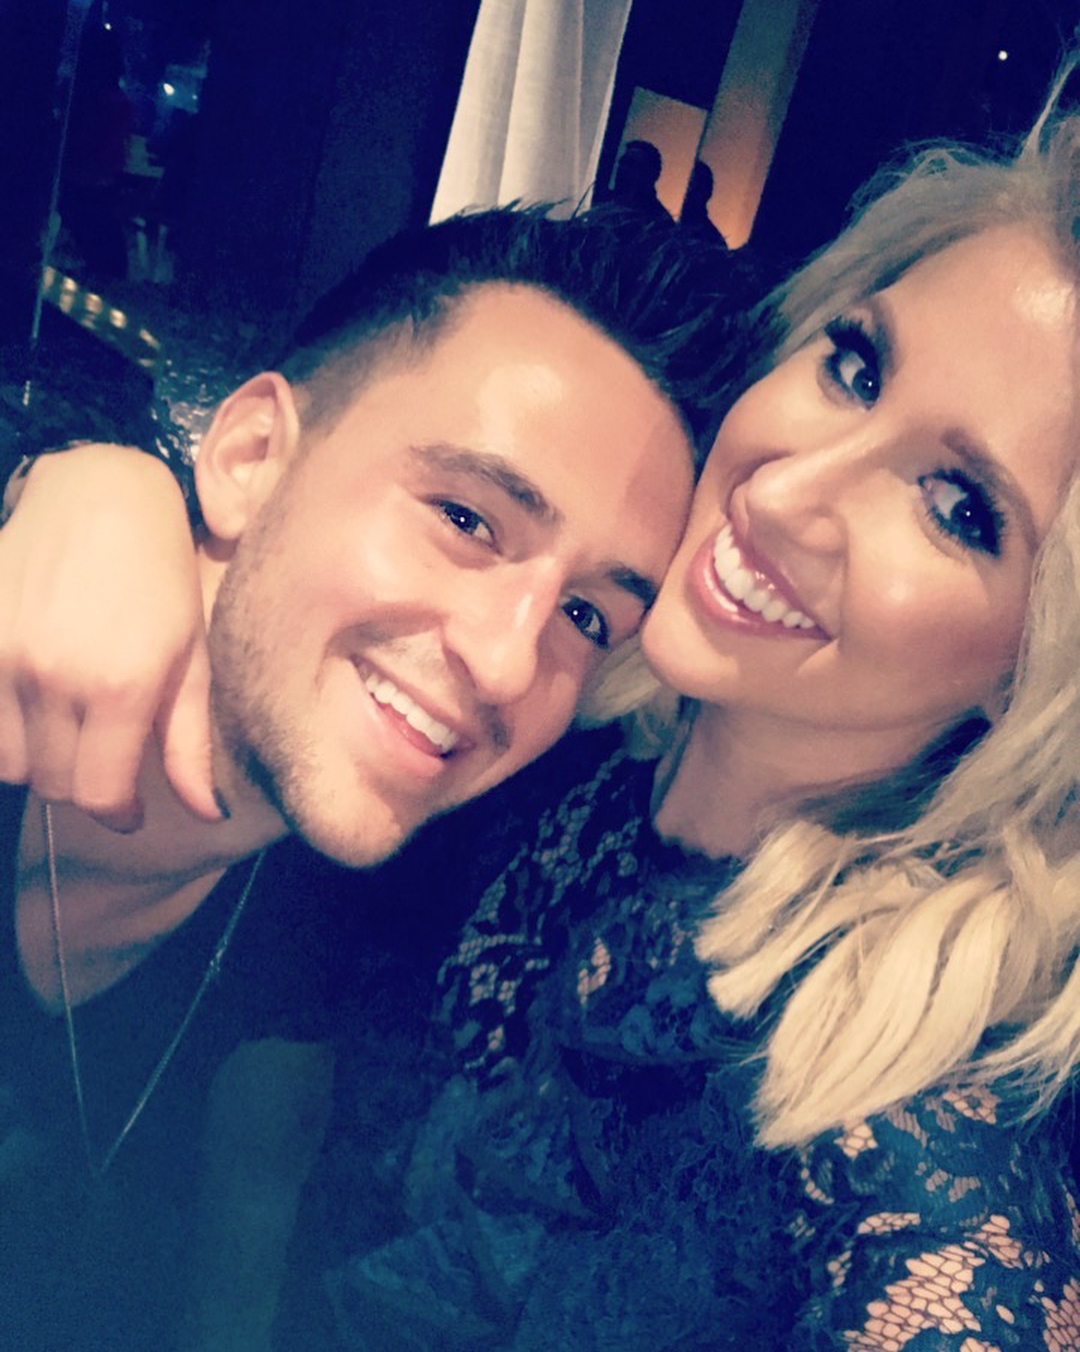 Savannah Chrisley goes Instagram official and gushes about new boyfriend Nic Kerdiles ...